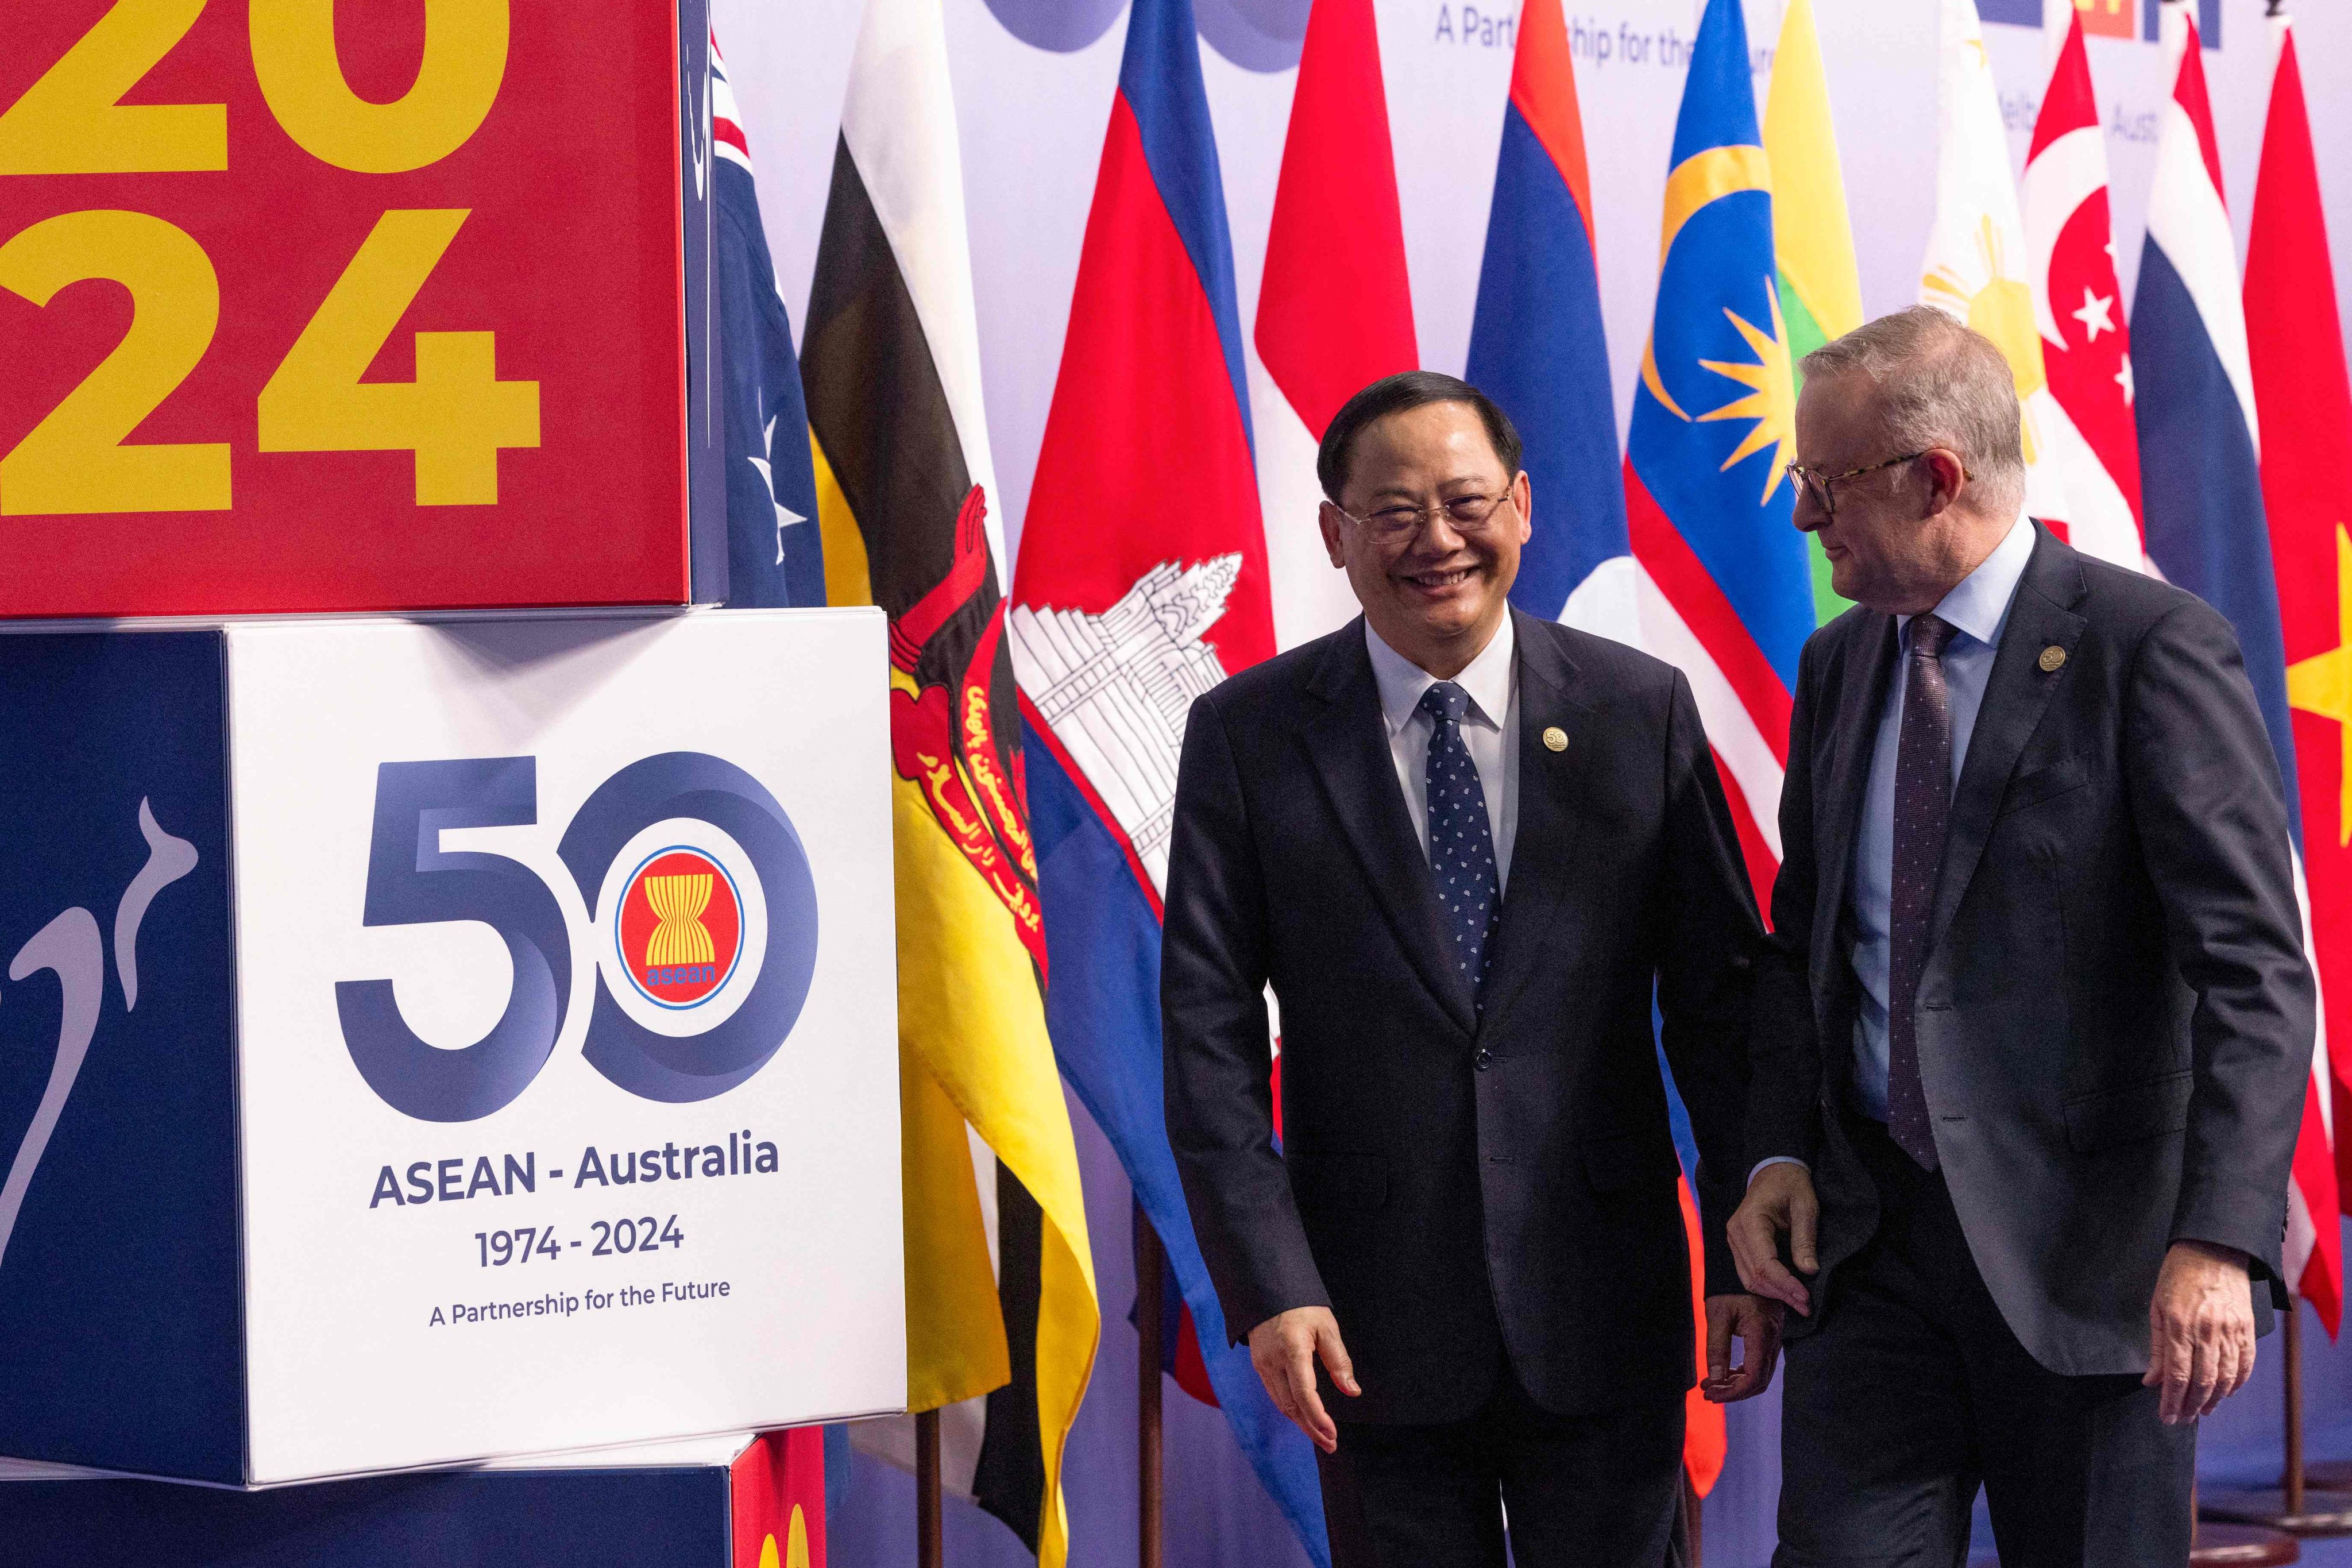  Laos’ Prime Minister Sonexay Siphandone (left) and Australia’s Prime Minister Anthony Albanese at the Asean-Australia Special Summit 2024 in Melbourne on March 6. Photo: Asean-Australia Special Summit 2024/AFP